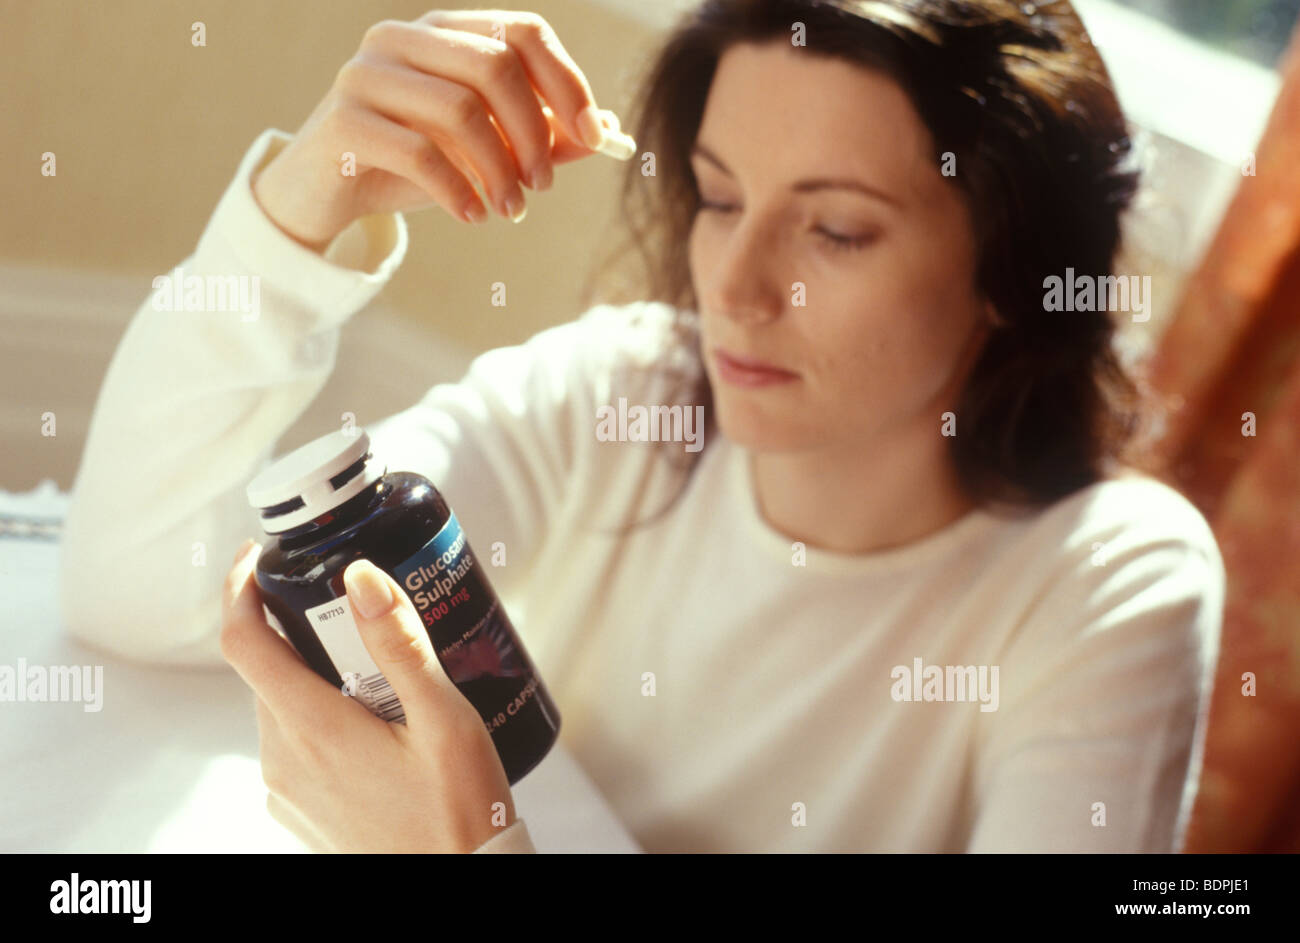 woman taking glucosamine sulphate supplements Stock Photo